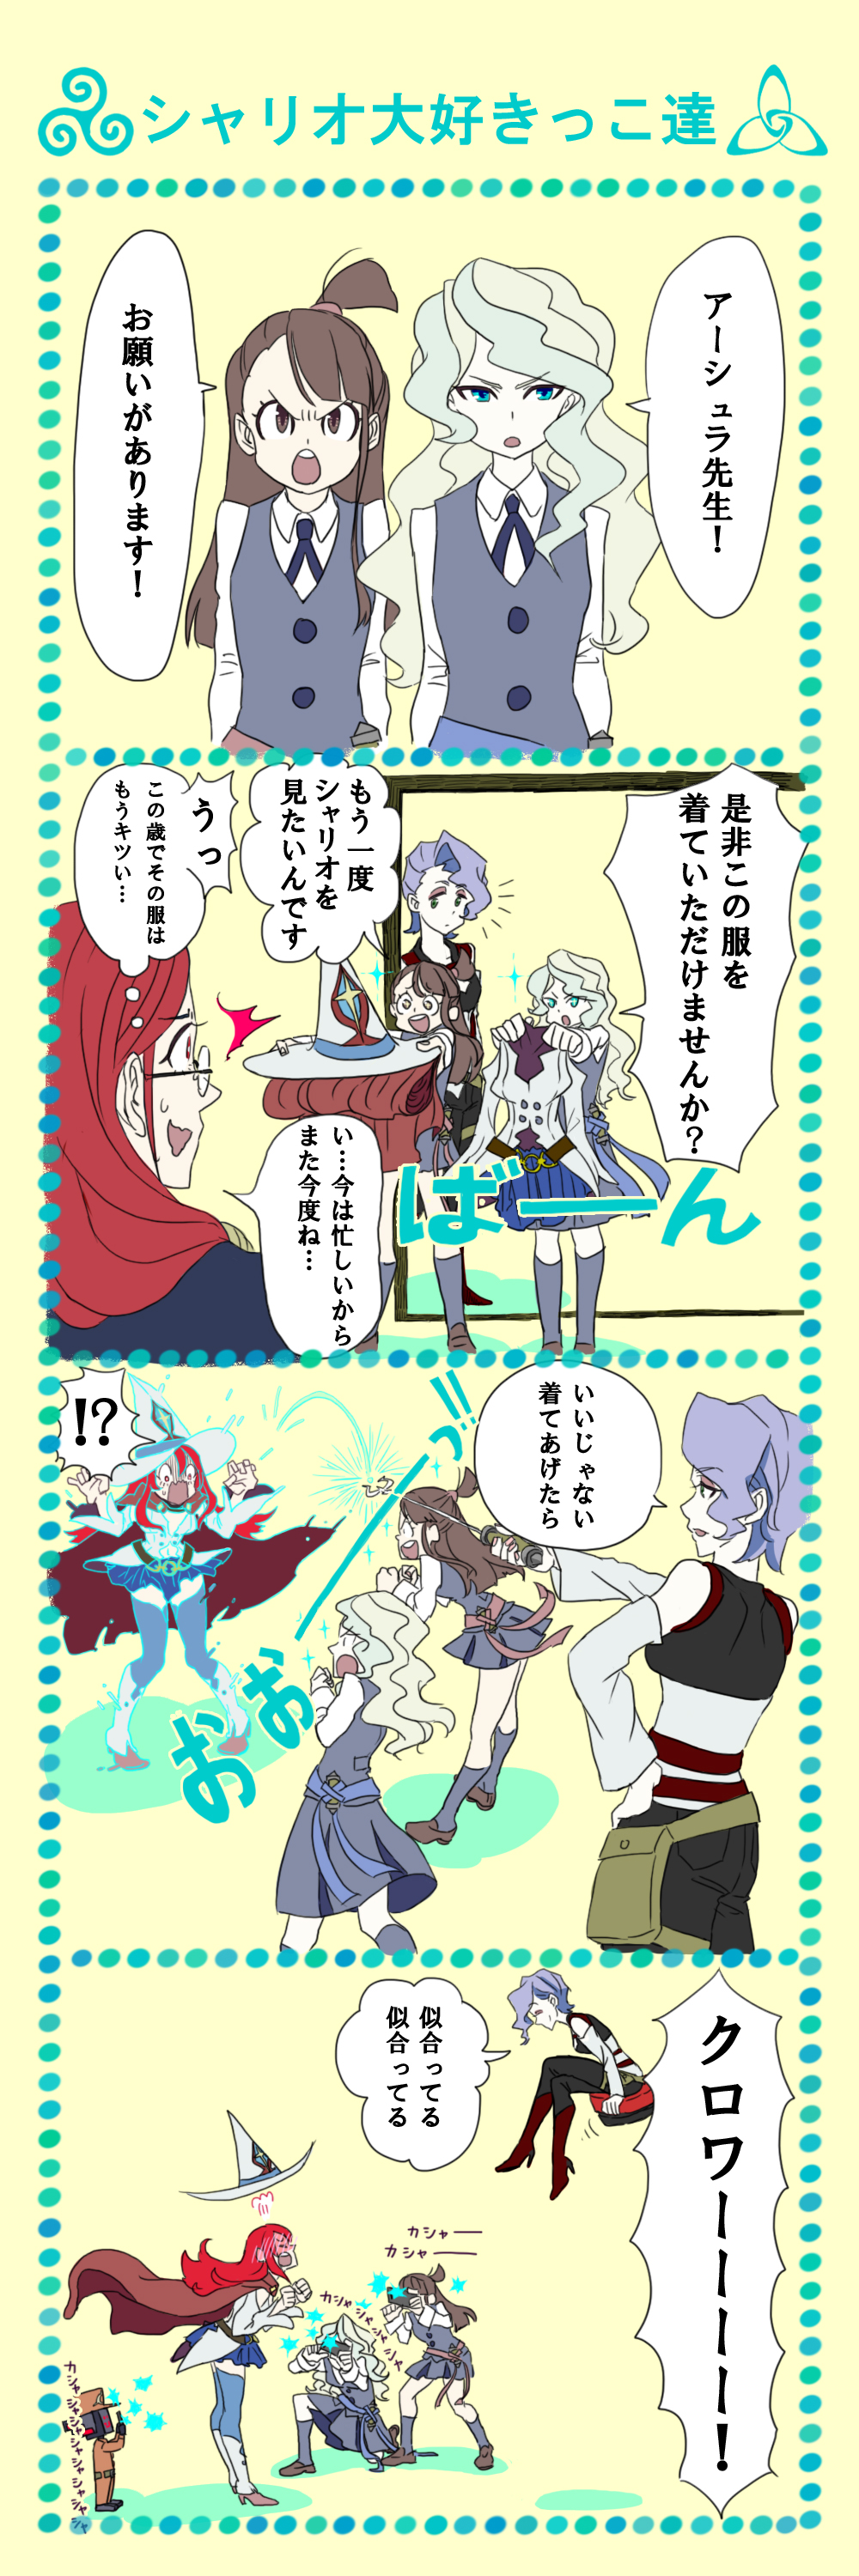 4girls absurdres blue_eyes boots brown_hair camera casting_spell croix_meridies diana_cavendish fan green_hair hat highres kagari_atsuko little_witch_academia long_hair multiple_girls open_mouth red_eyes redhead school_uniform shiny_chariot speech_bubble taking_picture translation_request ursula_charistes wand witch witch_hat yuri